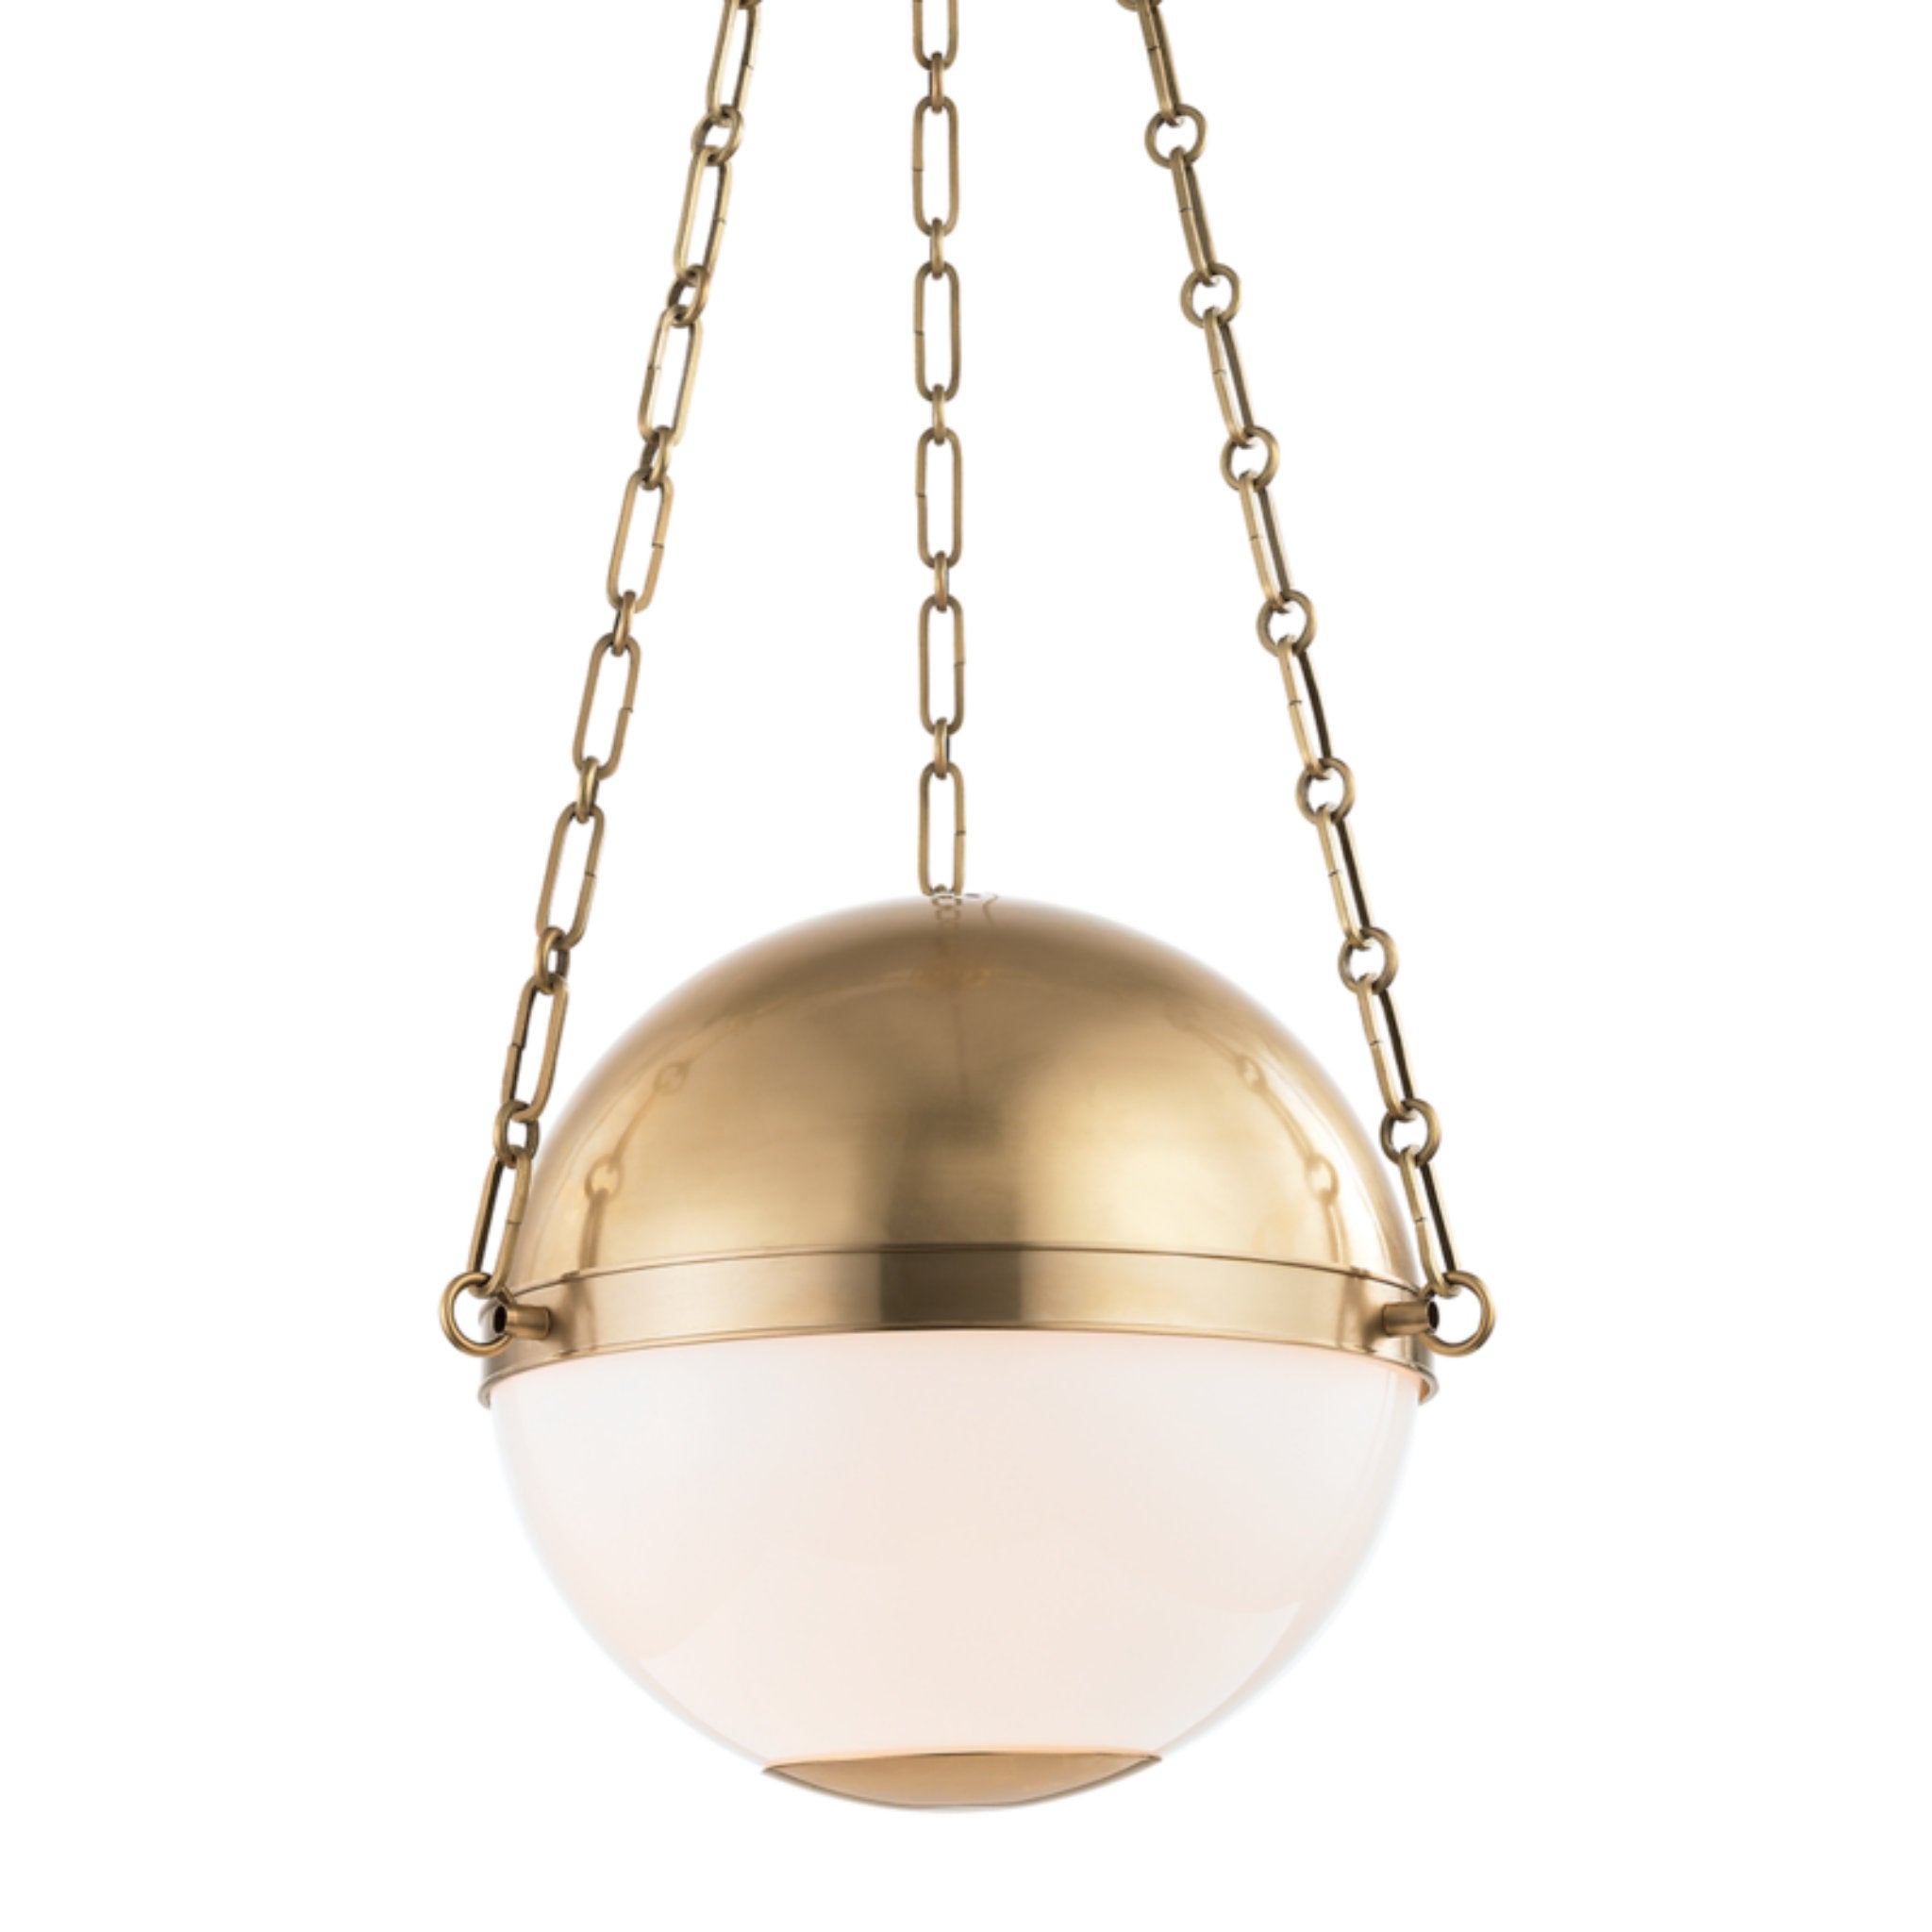 Sphere No.2 2 Light Pendant in Aged Brass by Mark D. Sikes